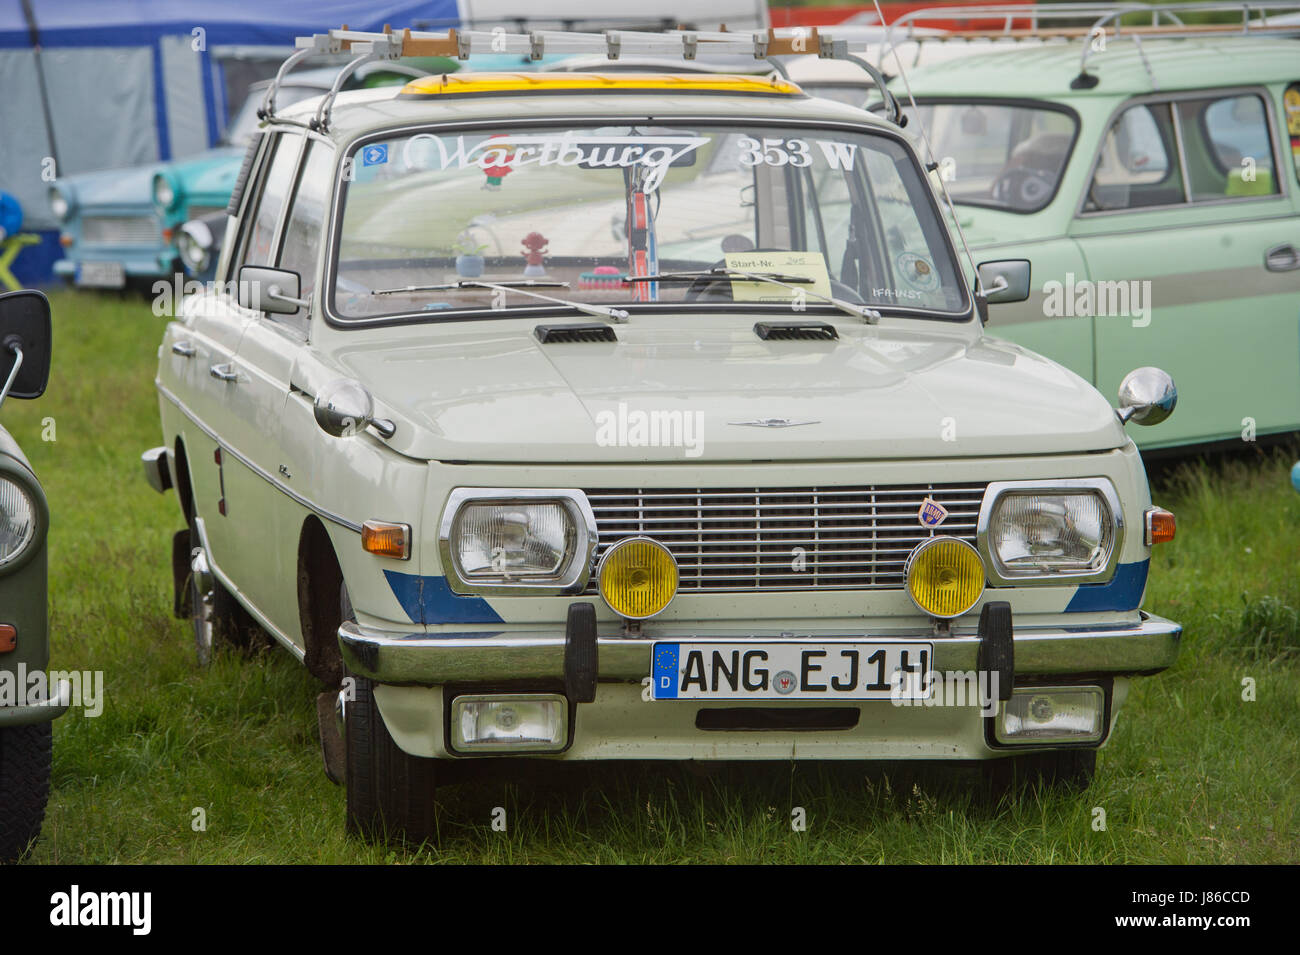 A Wartburg 353 W can be seen on the premises of the International Trabant Gathering in Anklam, Germany, 24 May 2017. The VEB Automobilwerkes Eisenach was manufacturer of the car 'Wartburg'. Photo: Stefan Sauer/dpa-Zentralbild/dpa Stock Photo